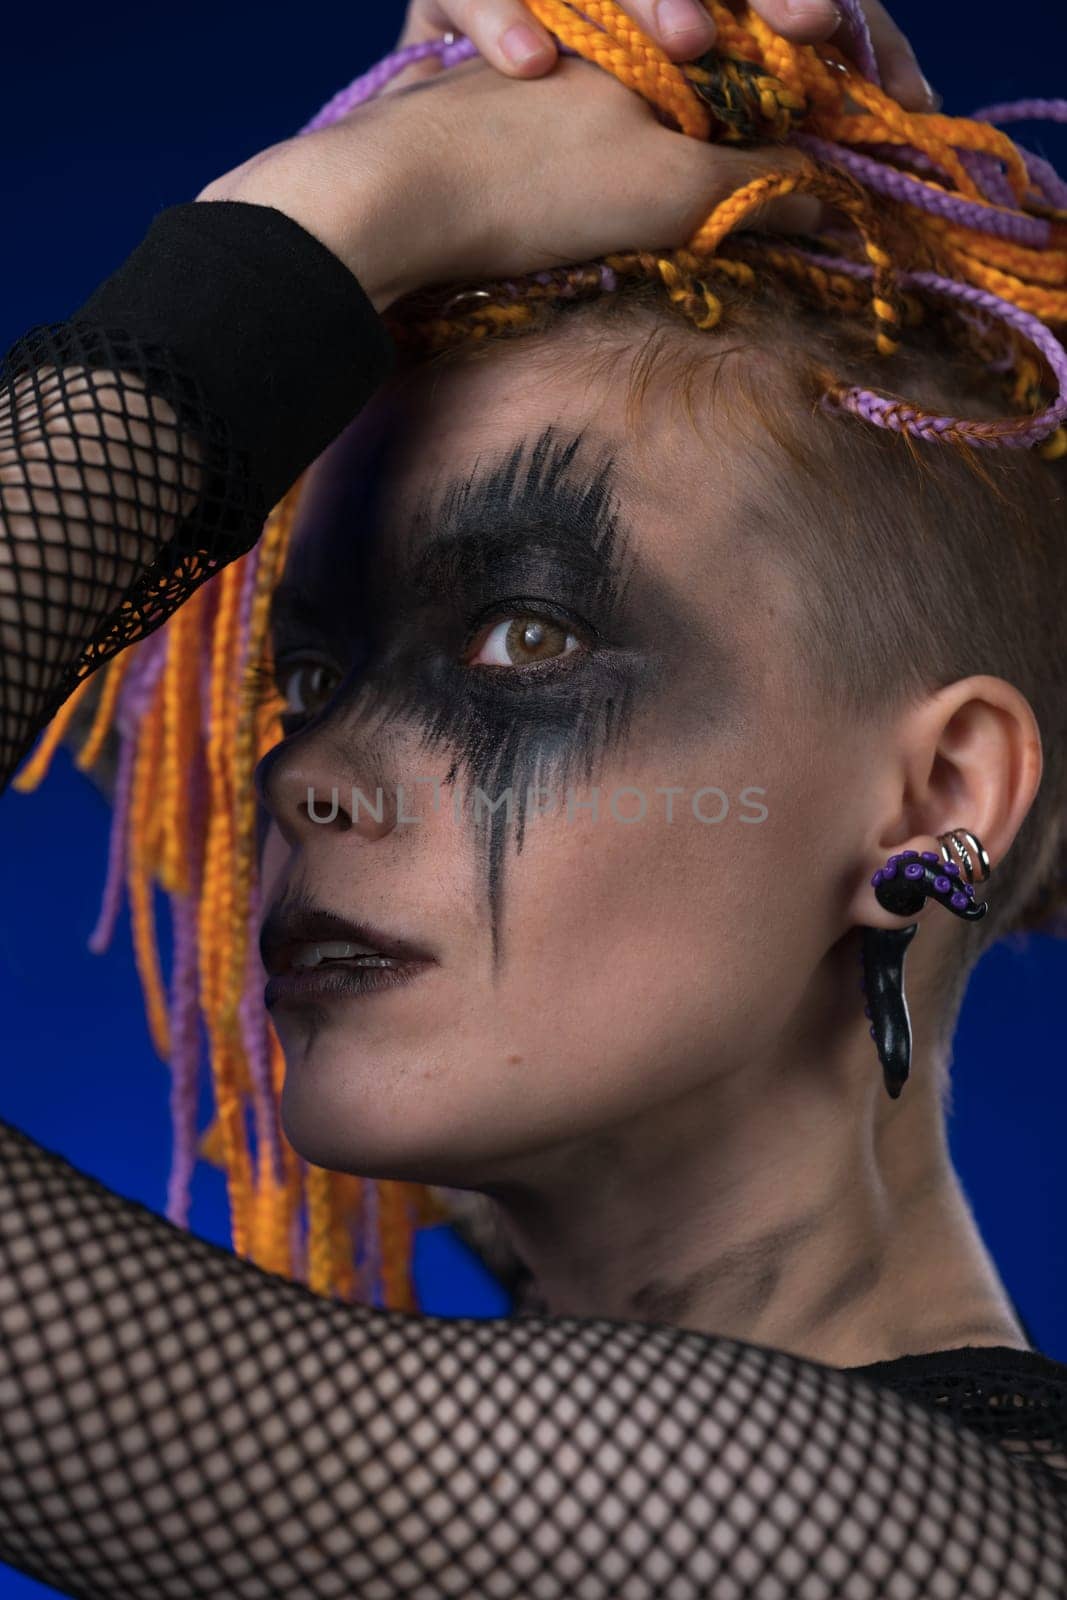 Fine art portrait beauty woman with colored dreadlocks and spooky black stage makeup painted on face by Alexander-Piragis